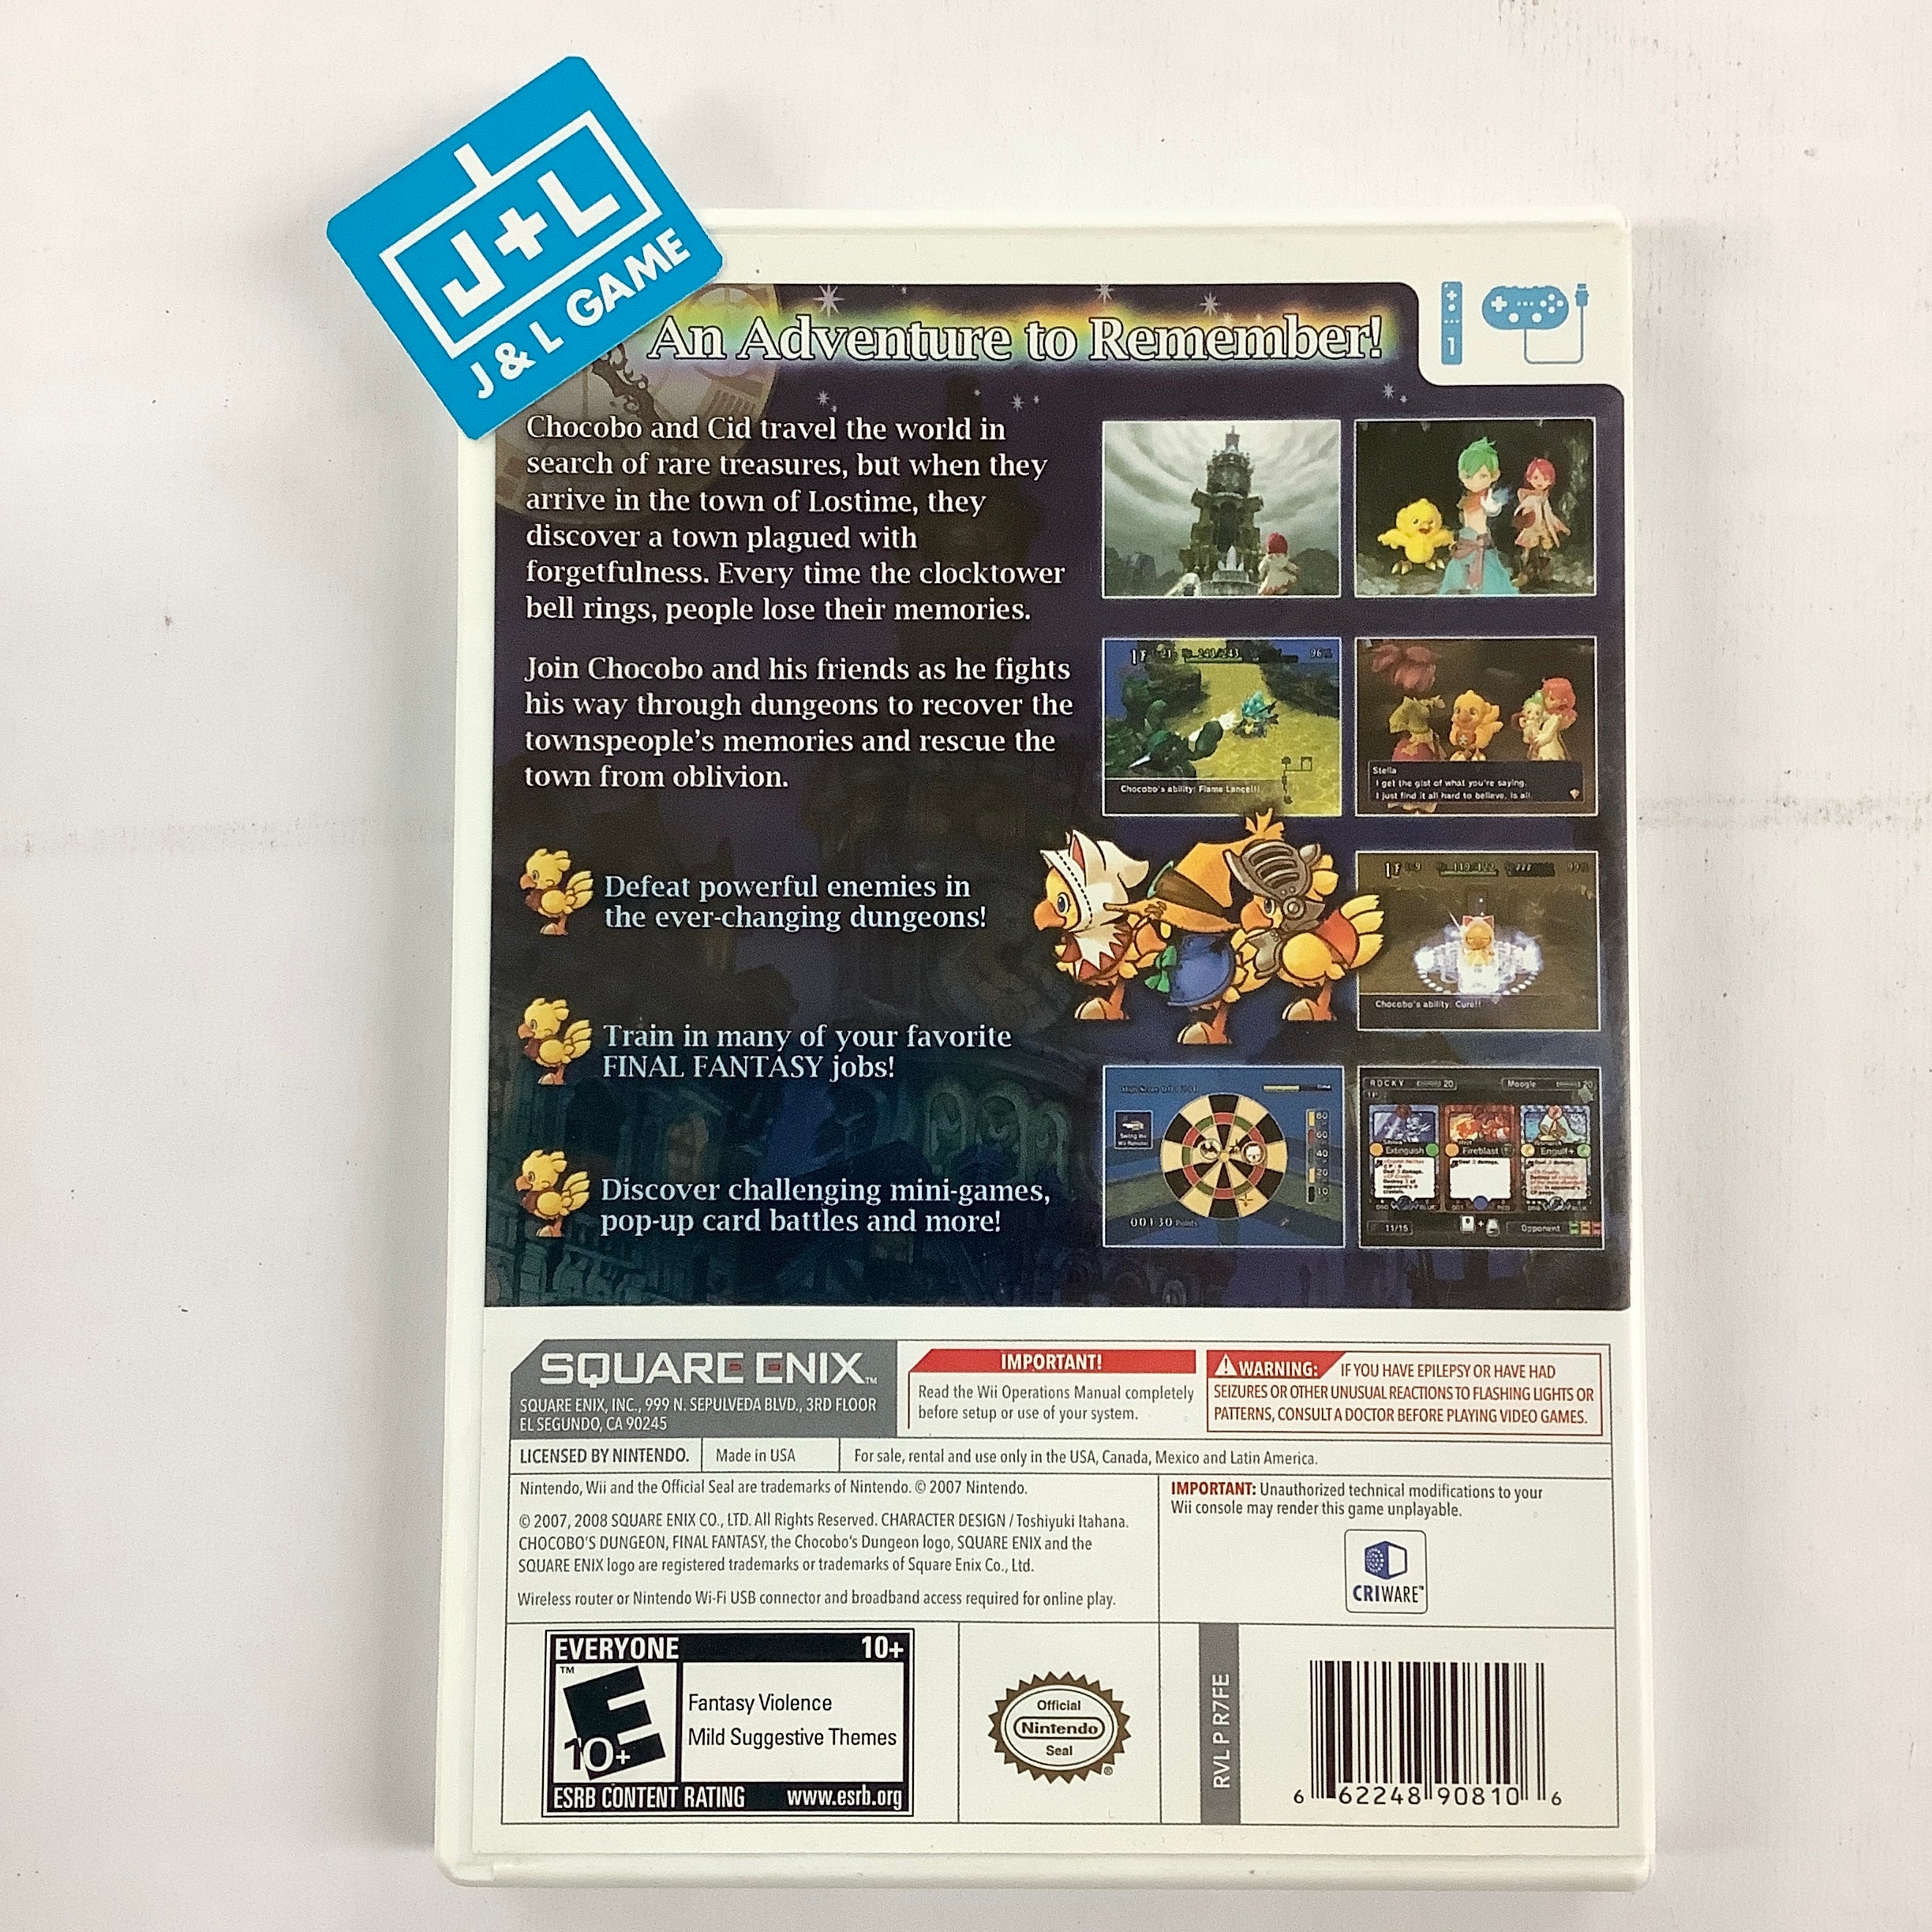 Final Fantasy Fables: Chocobo's Dungeon - Nintendo Wii [Pre-Owned] Video Games Square Enix   